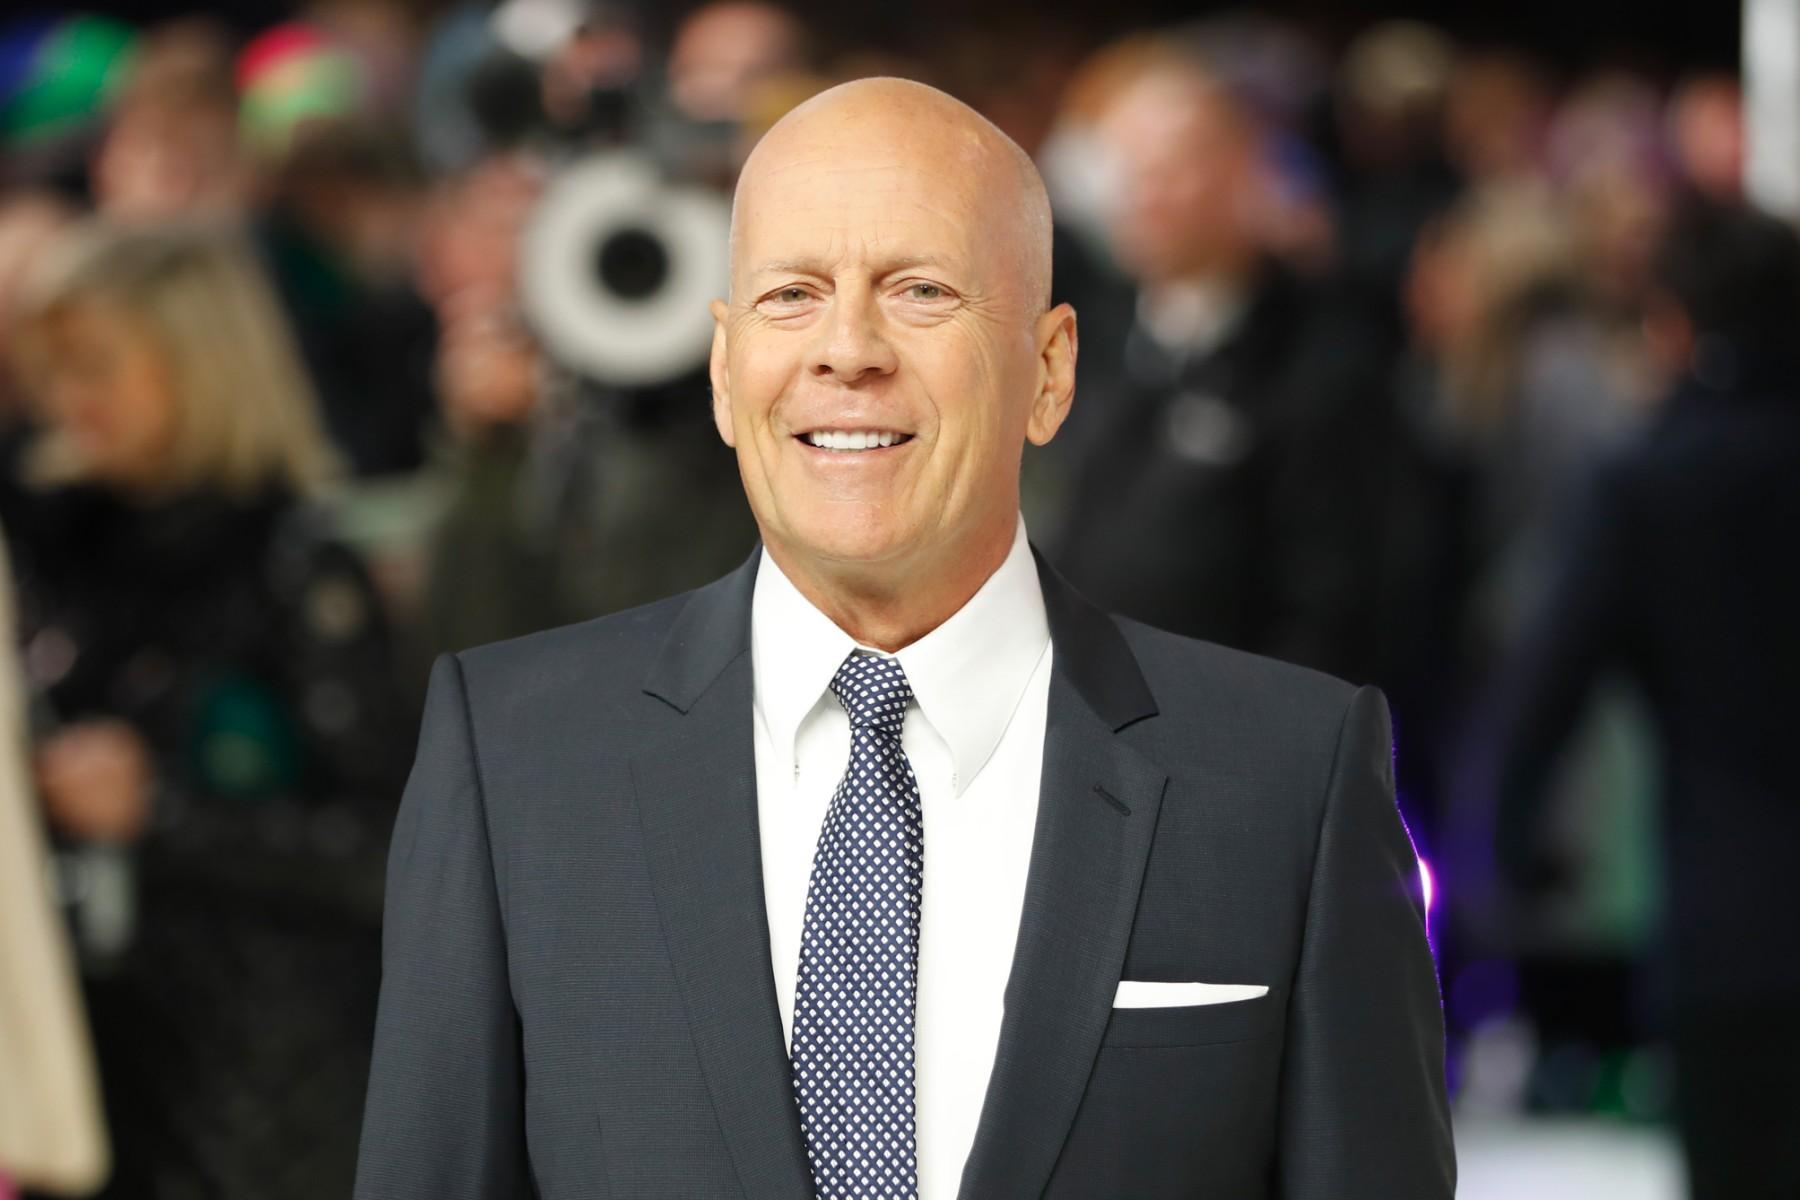 In this file photo taken on Jan 9, 2019, US actor Bruce Willis poses on arrival for the European premiere of 'Glass' in central London. Photo: AFP